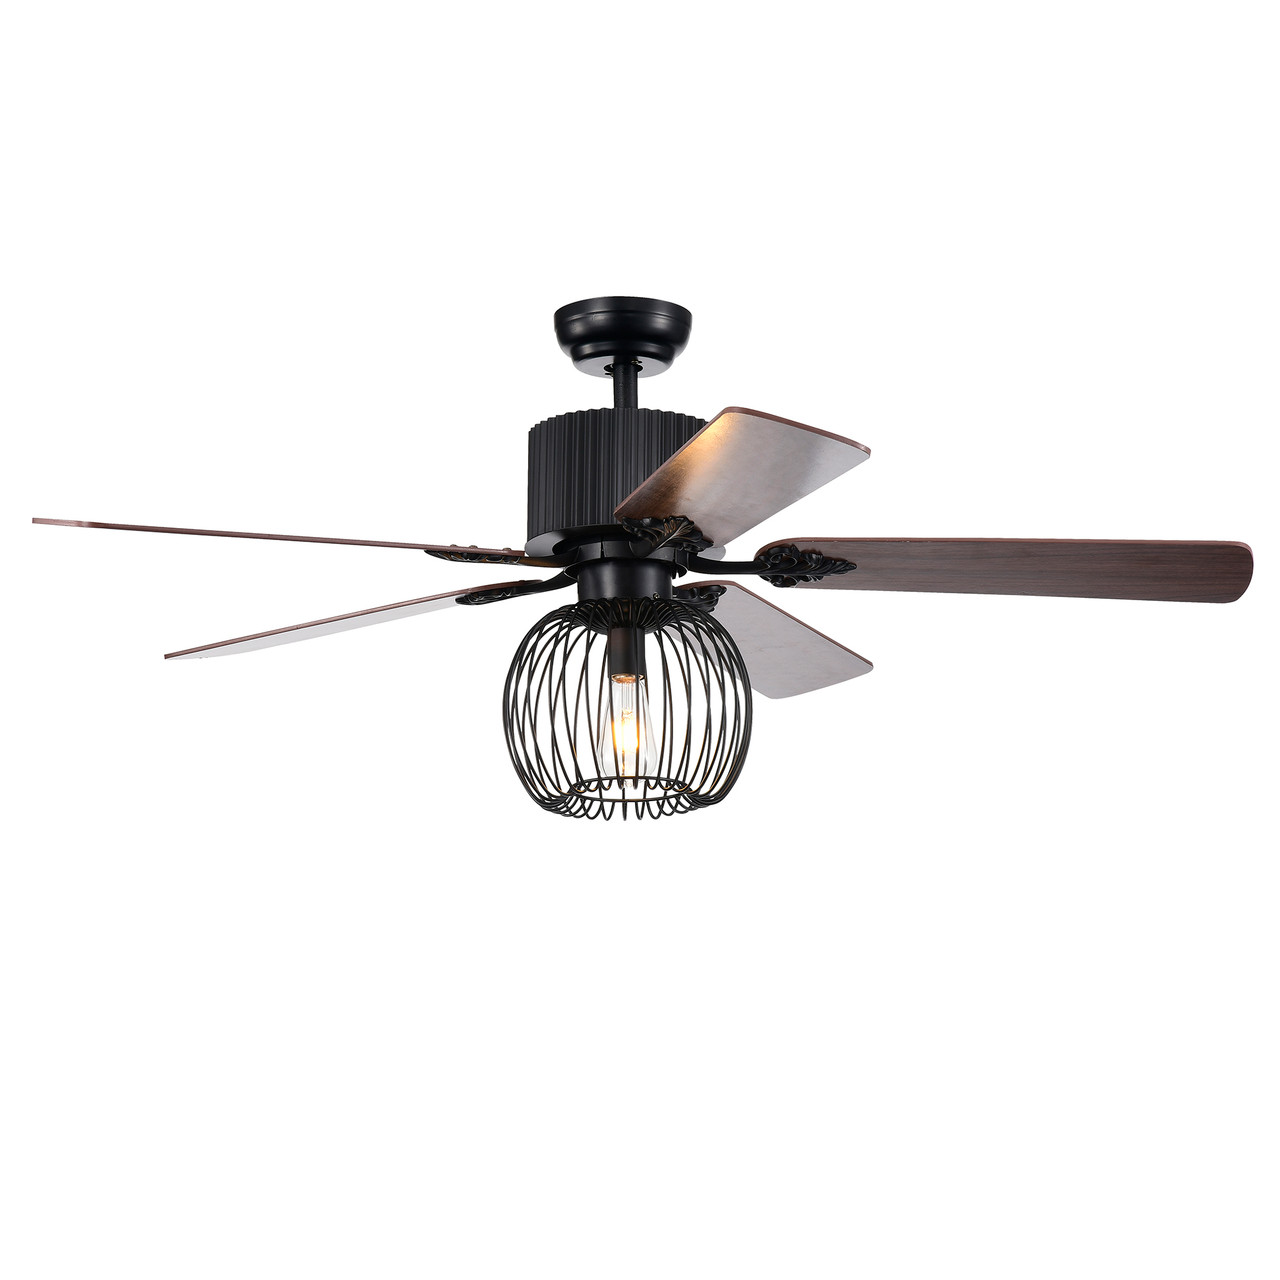 WAREHOUSE OF TIFFANY'S CFL-8388REMO/A Aguano 52 in. 1-Light Indoor Black Finish Remote Controlled Ceiling Fan with Light Kit